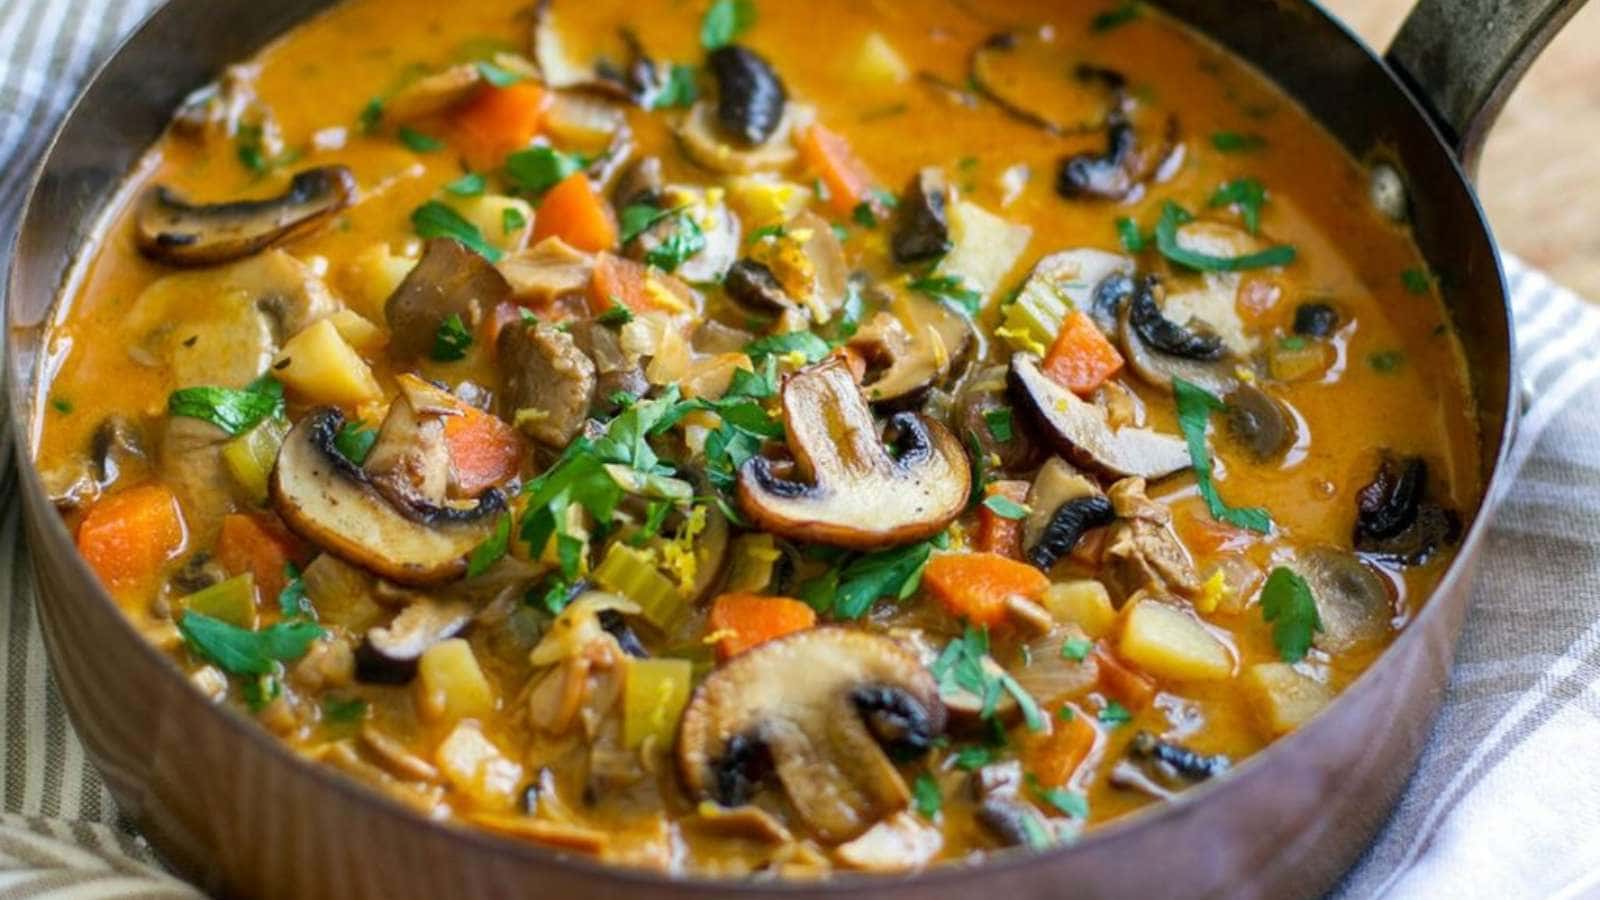 A bowl of stew made of mushrooms.